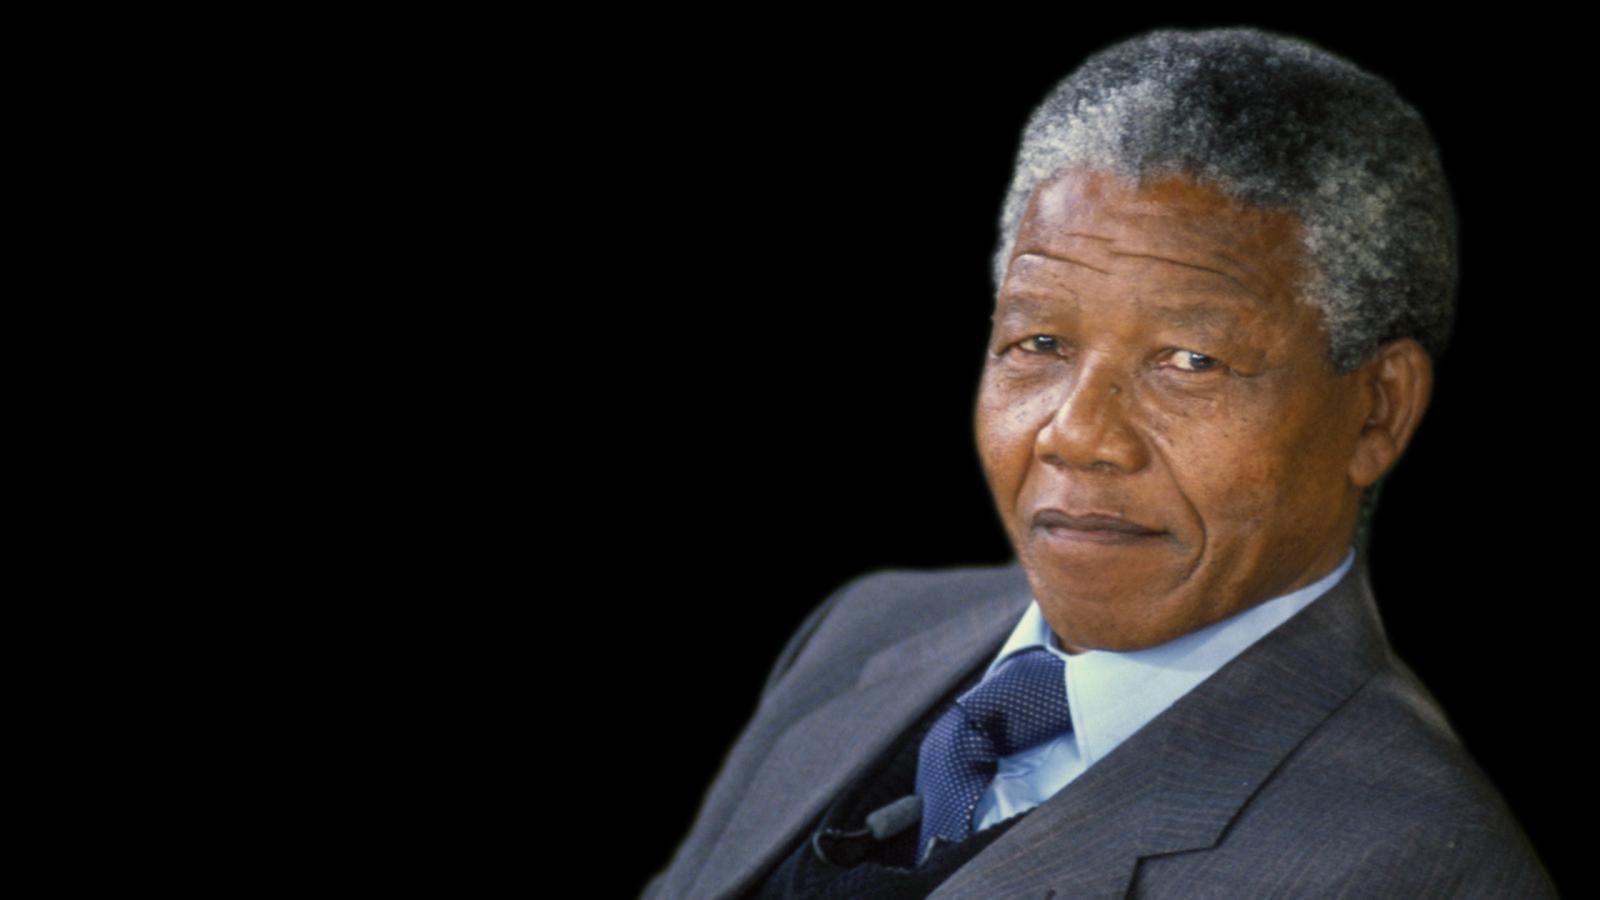 Remembering Nelson Mandela on the anniversary of his inauguration